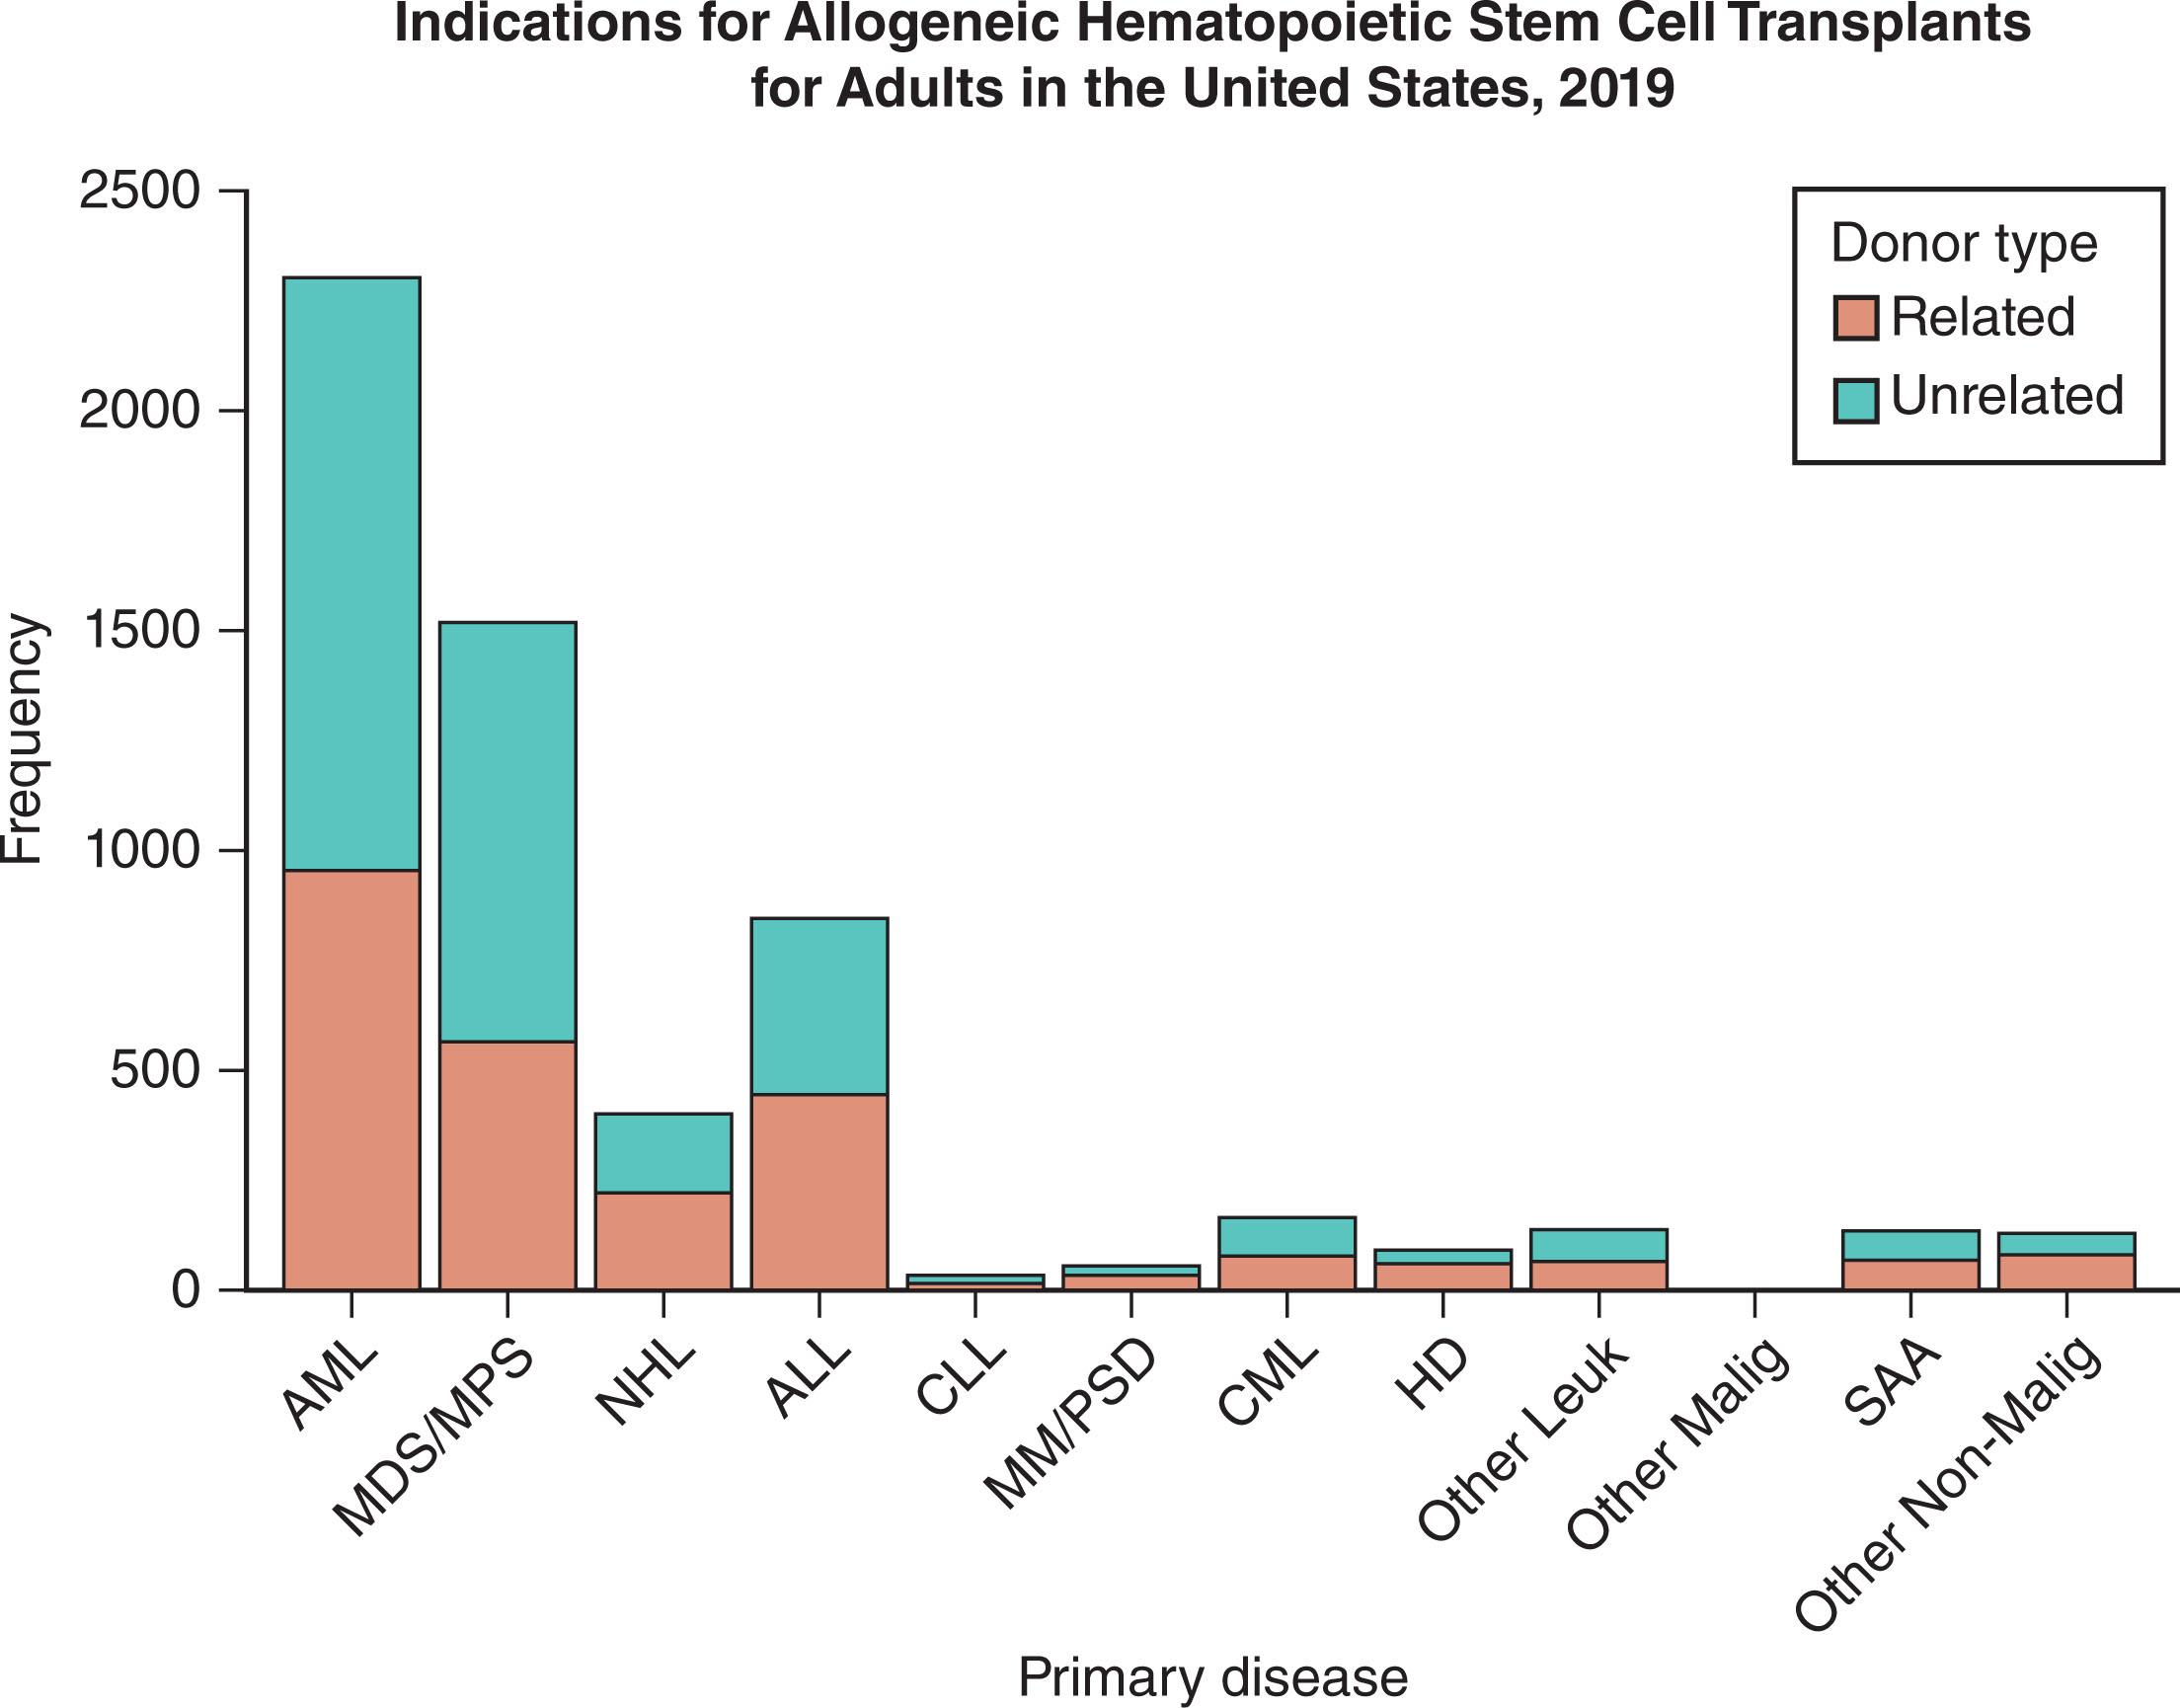 Figure 105.1, INDICATIONS FOR ALLOGENEIC HEMATOPOIETIC STEM CELL TRANSPLANTATION IN ADULTS (US DATA), 2019.